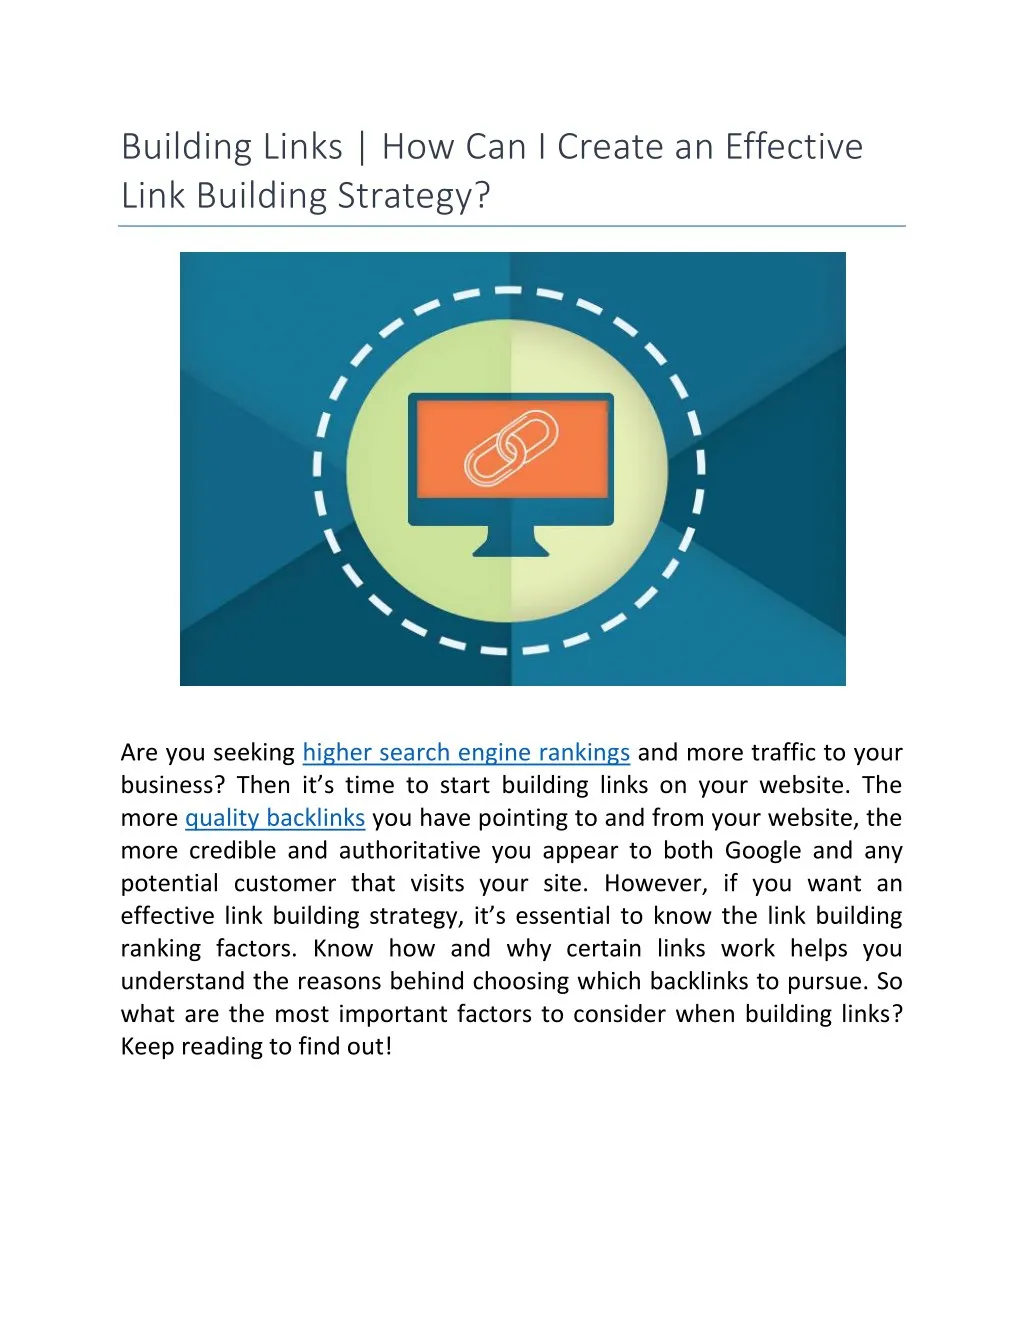 building links how can i create an effective link